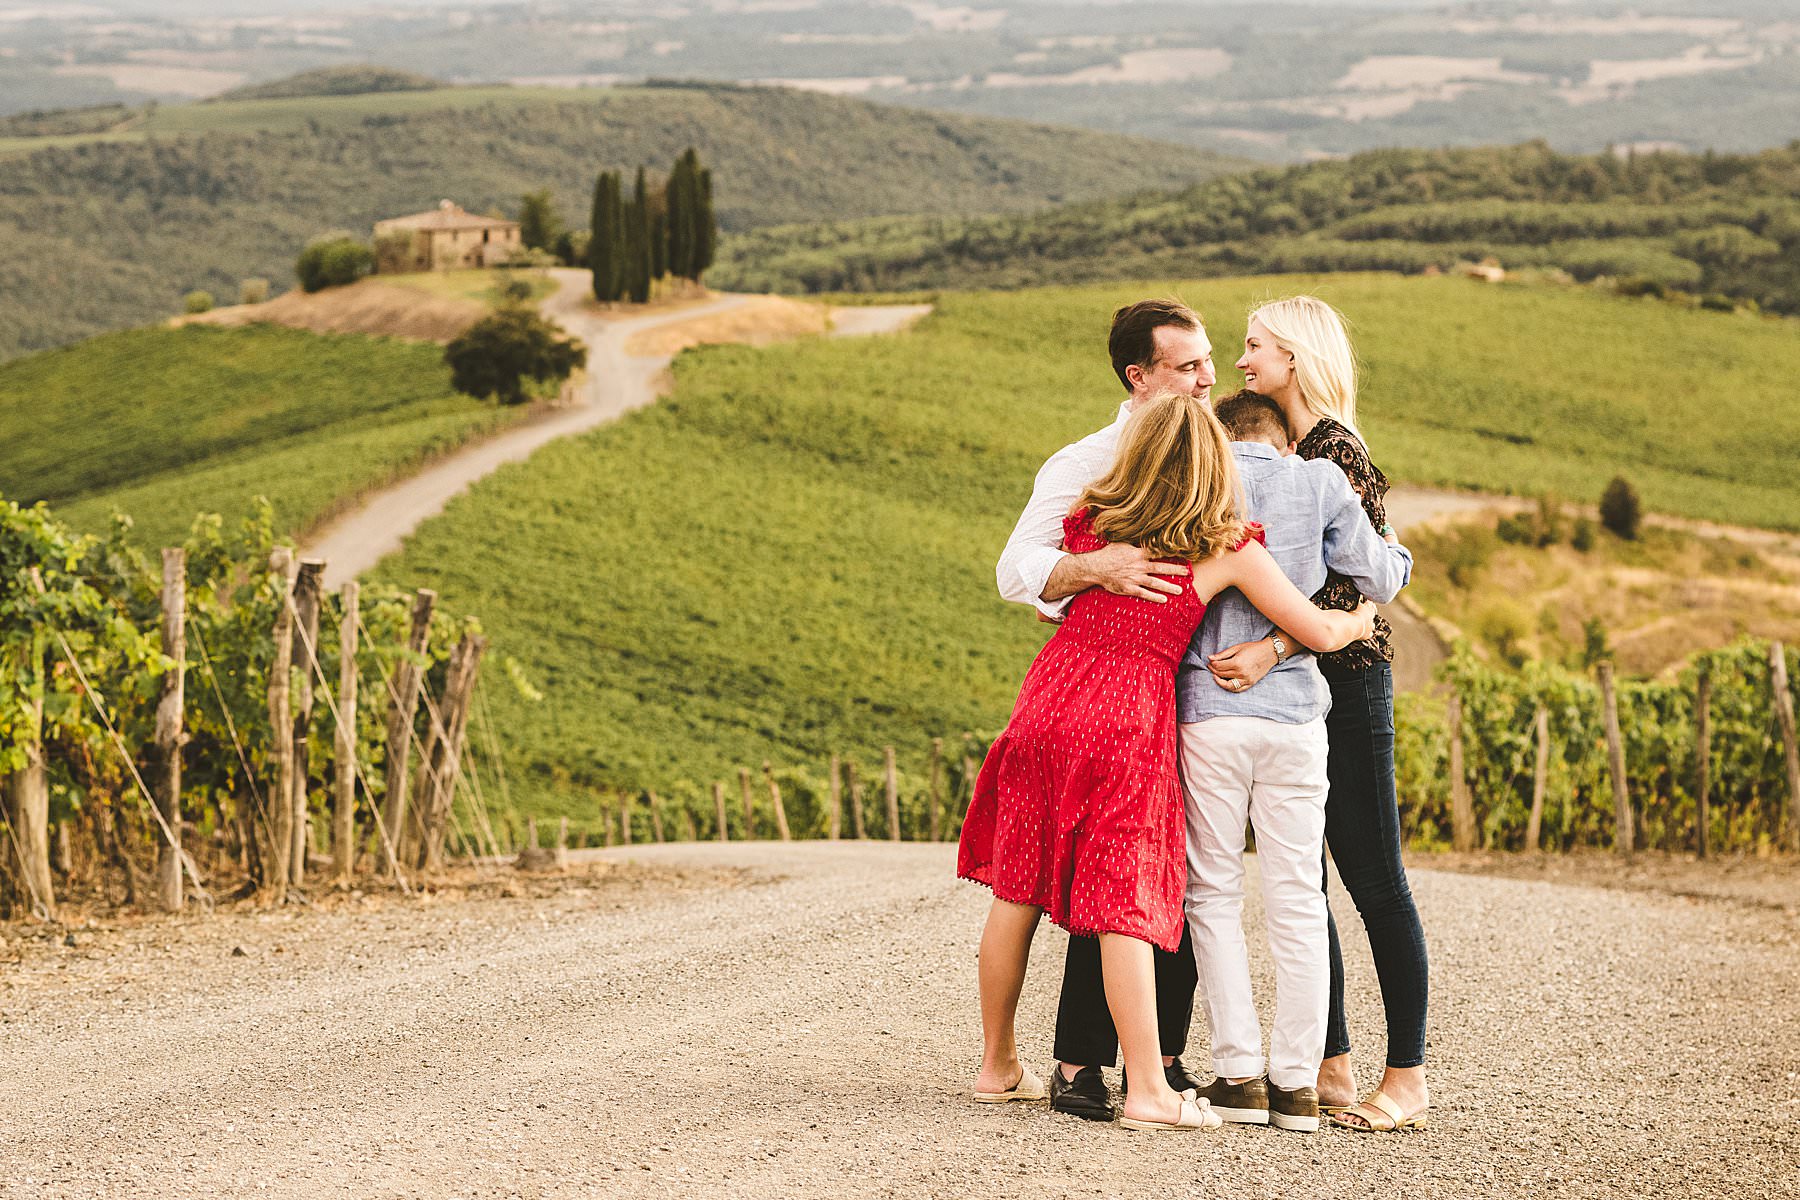 Sweet family photos in the astounding Val d’Orcia in the private vineyard, called “Capanna”. Such a breathtaking and unforgettable spot!